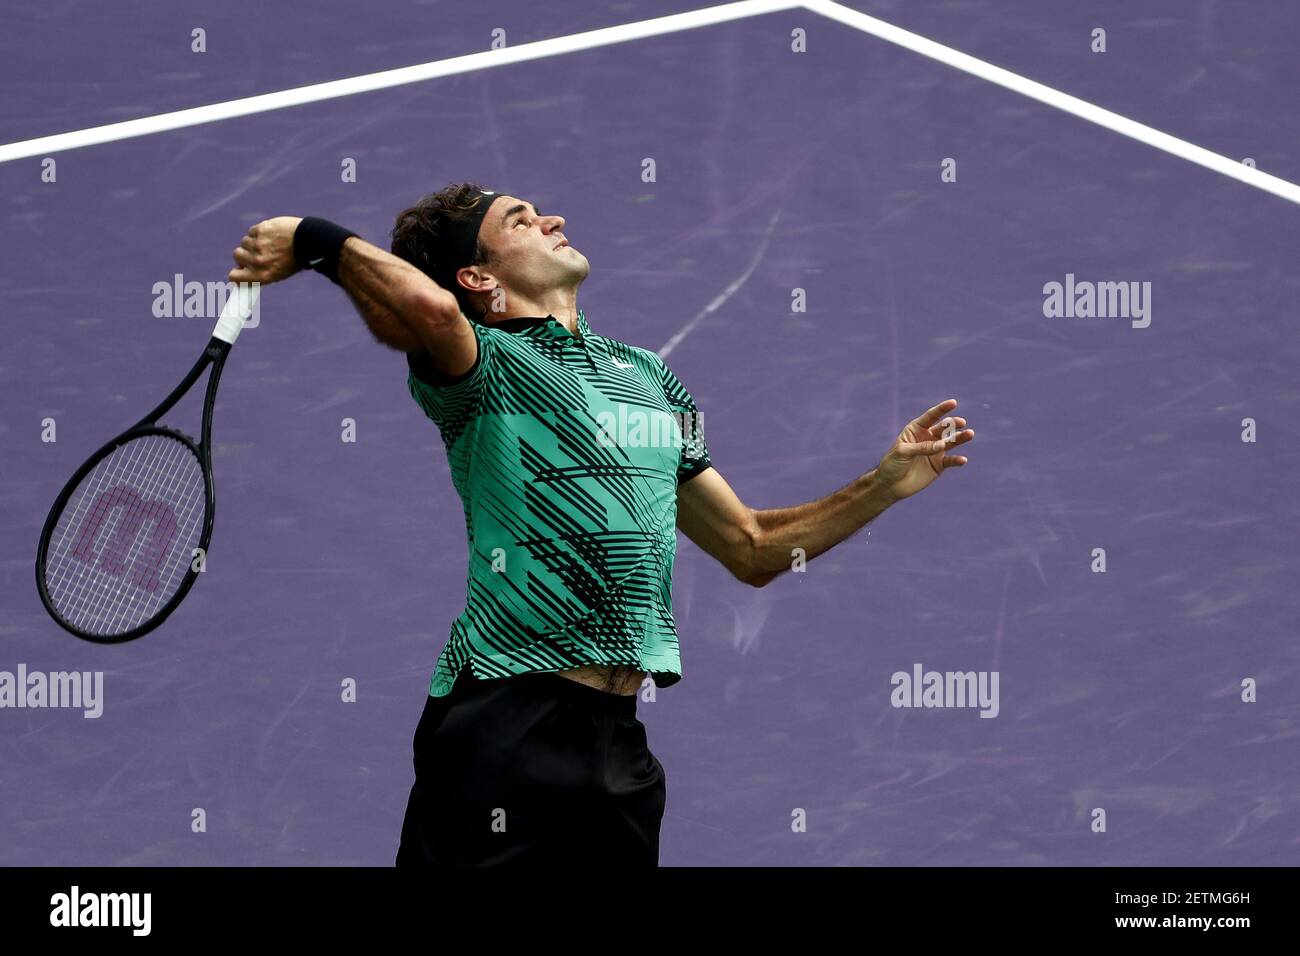 Apr 2, 2017; Key Biscayne, FL, USA; Roger Federer of Switzerland serves  against Rafael Nadal of Spain (not pictured) in the men's singles  championship of the 2017 Miami Open at Crandon Park